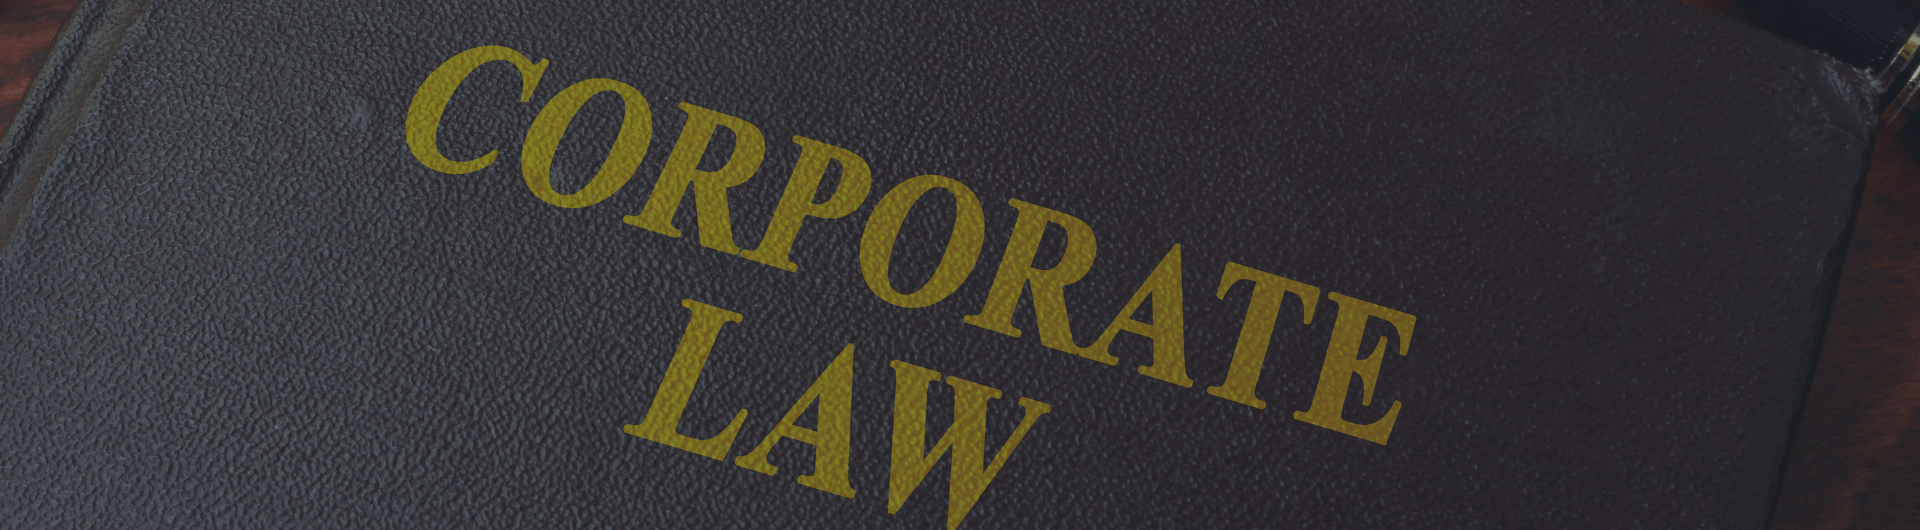 corporate law banner